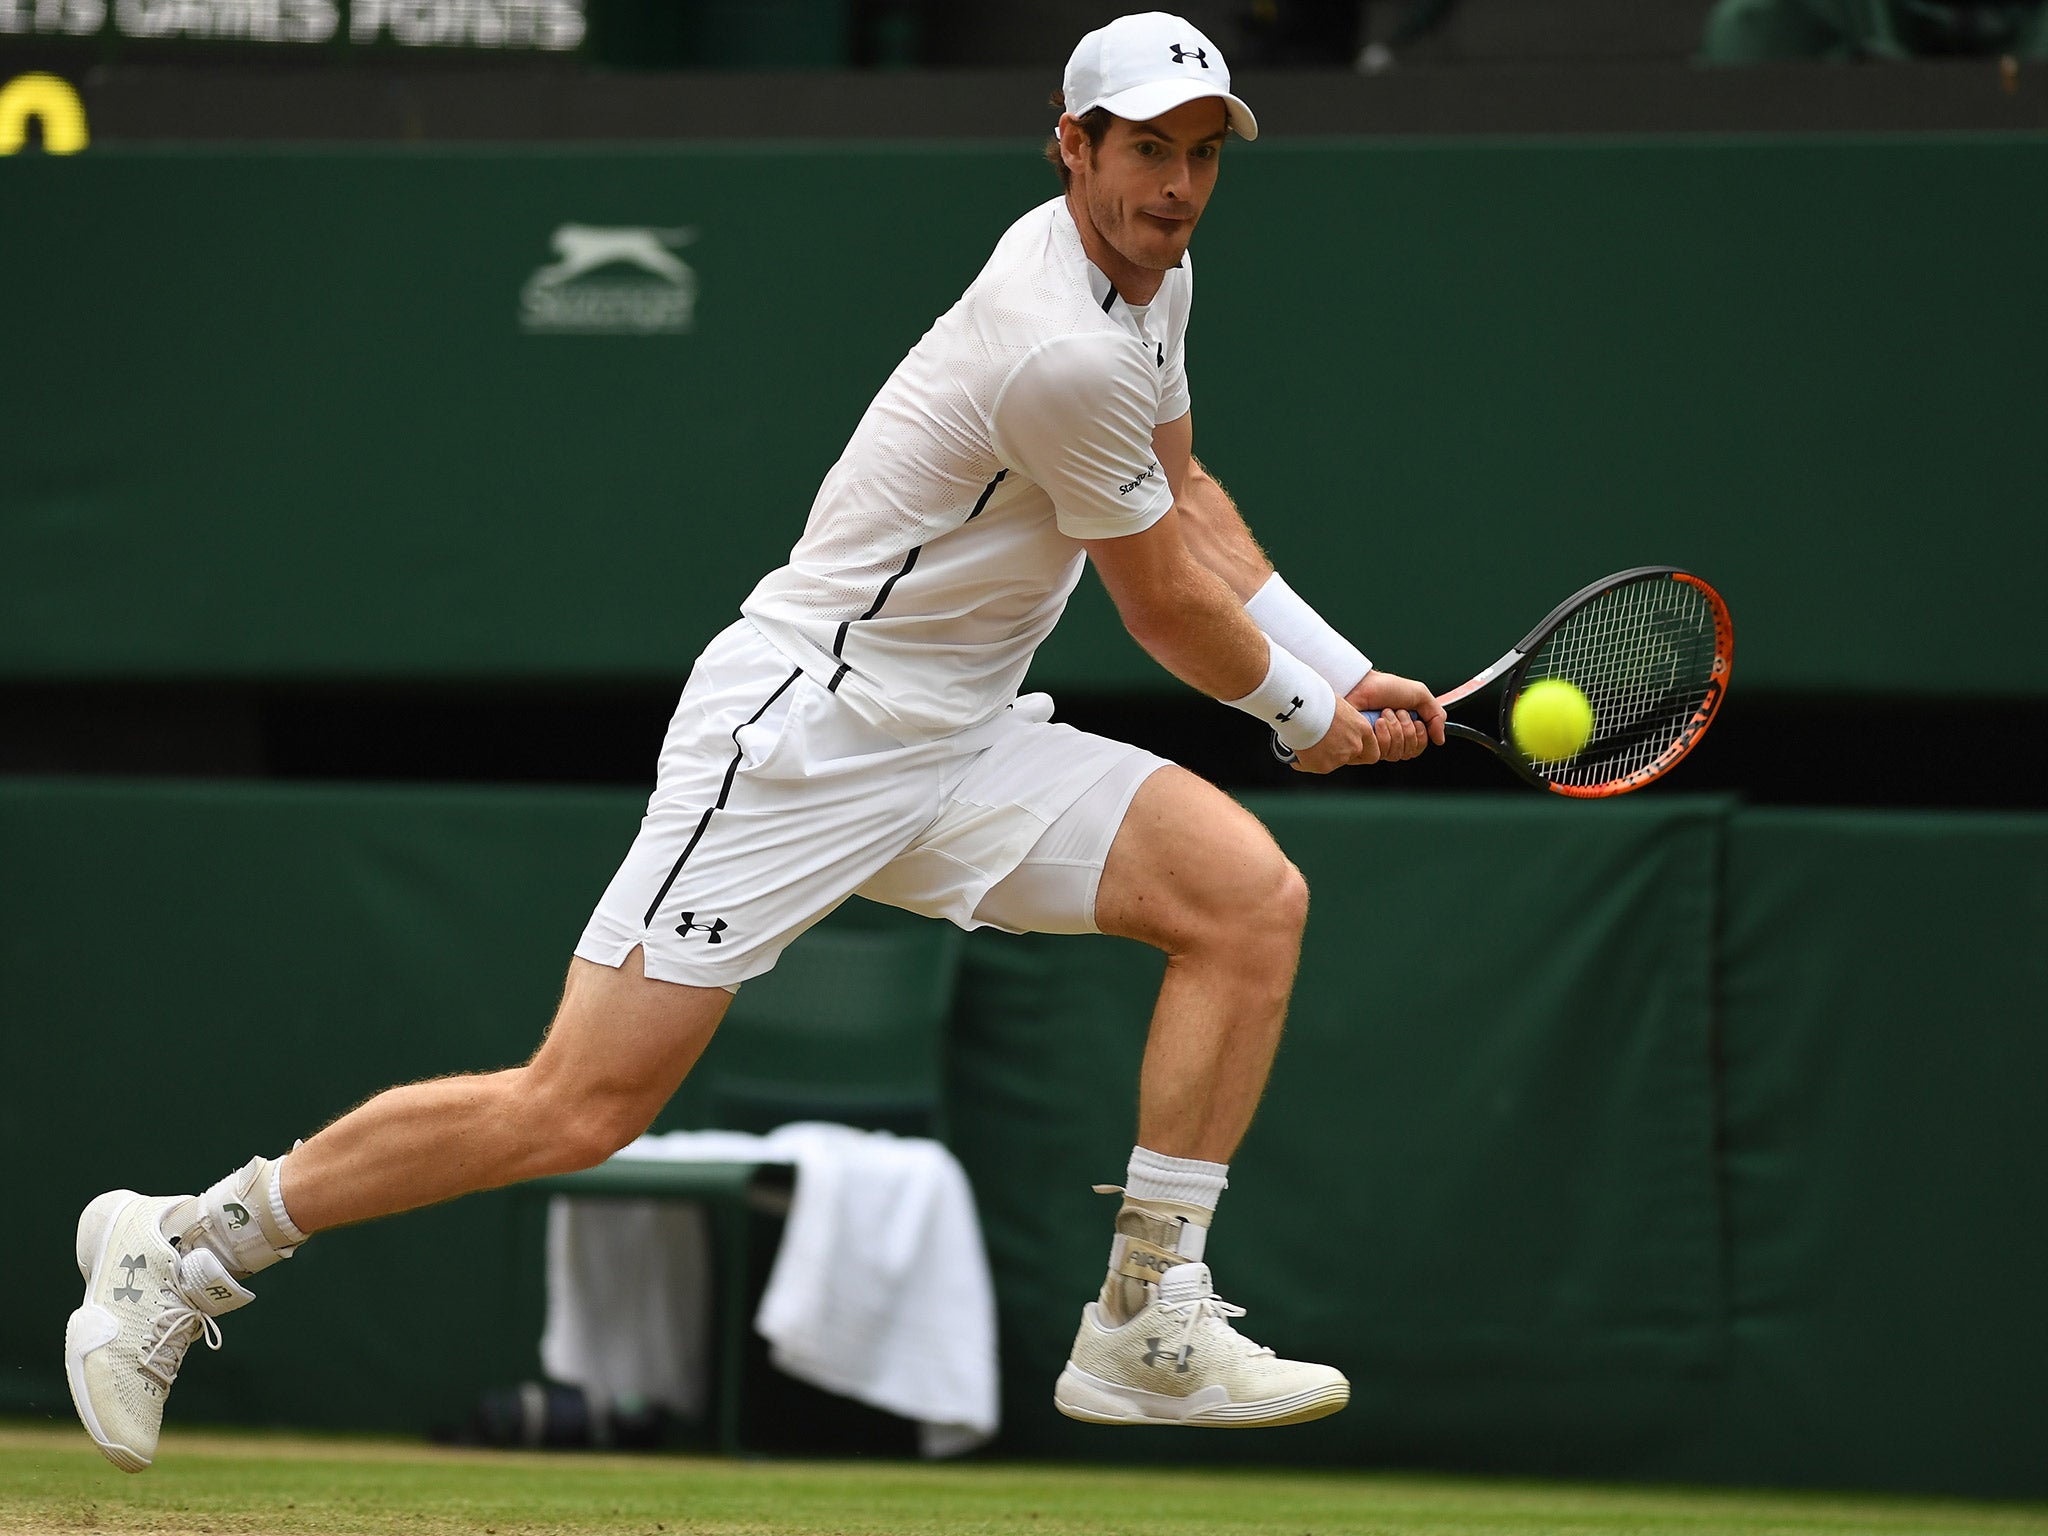 Andy Murray is in men's quarter-final action against Jo-Wilfried Tsonga